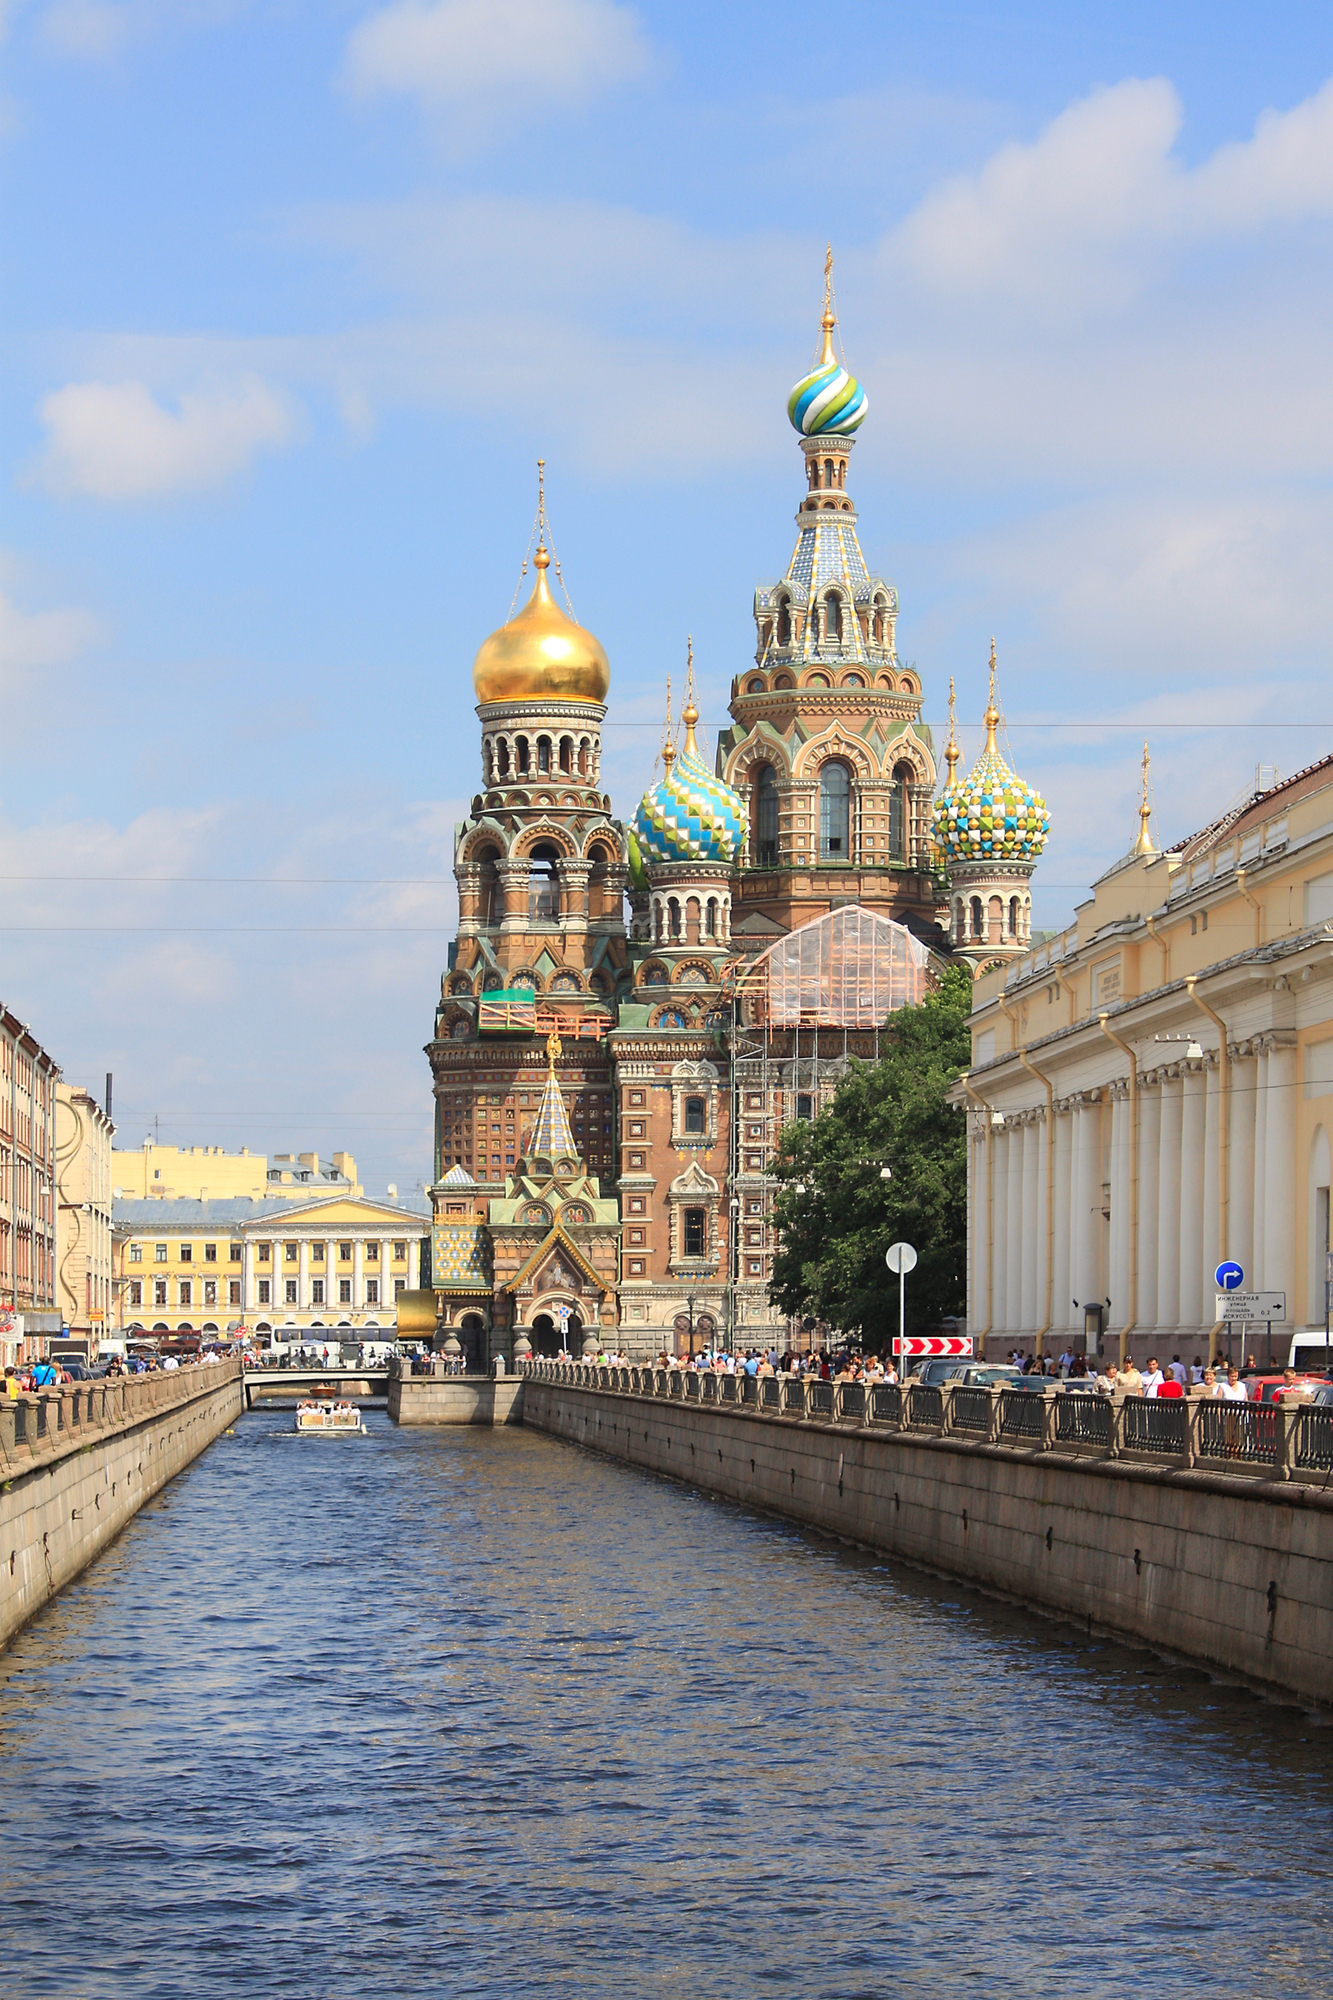 Meanwhile in Russia: My Journey – Steven B.